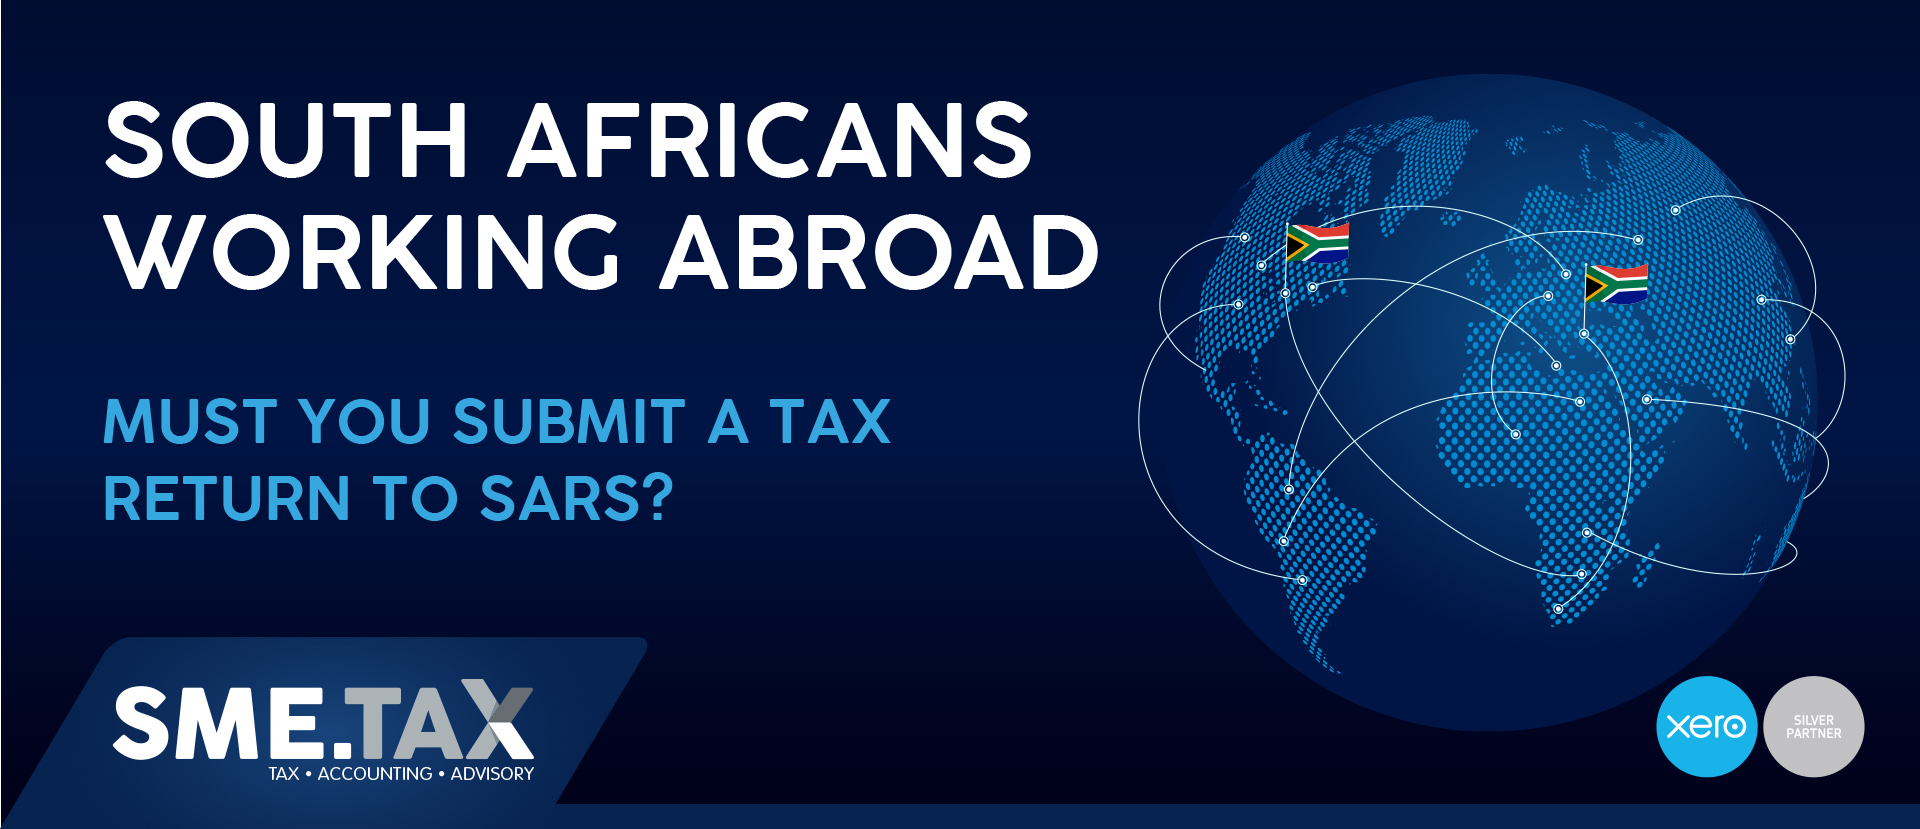 SOUTH AFRICANS WORKING ABROAD. Must you submit a tax return to SARS